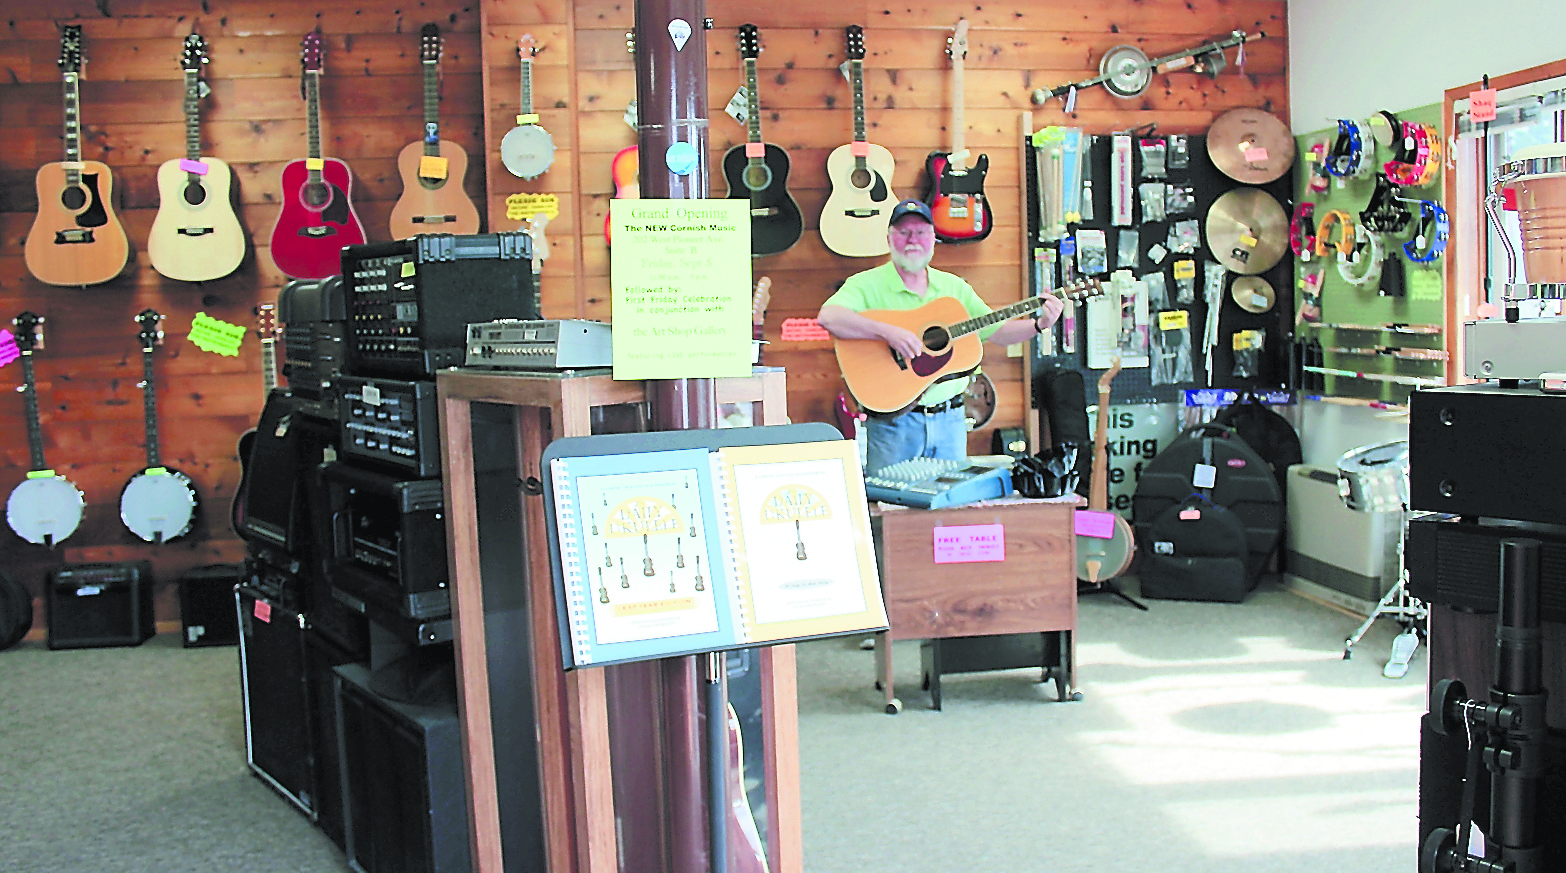 Steve Cornish plays music in his new shop, in the same building as the Art Shop Gallery.